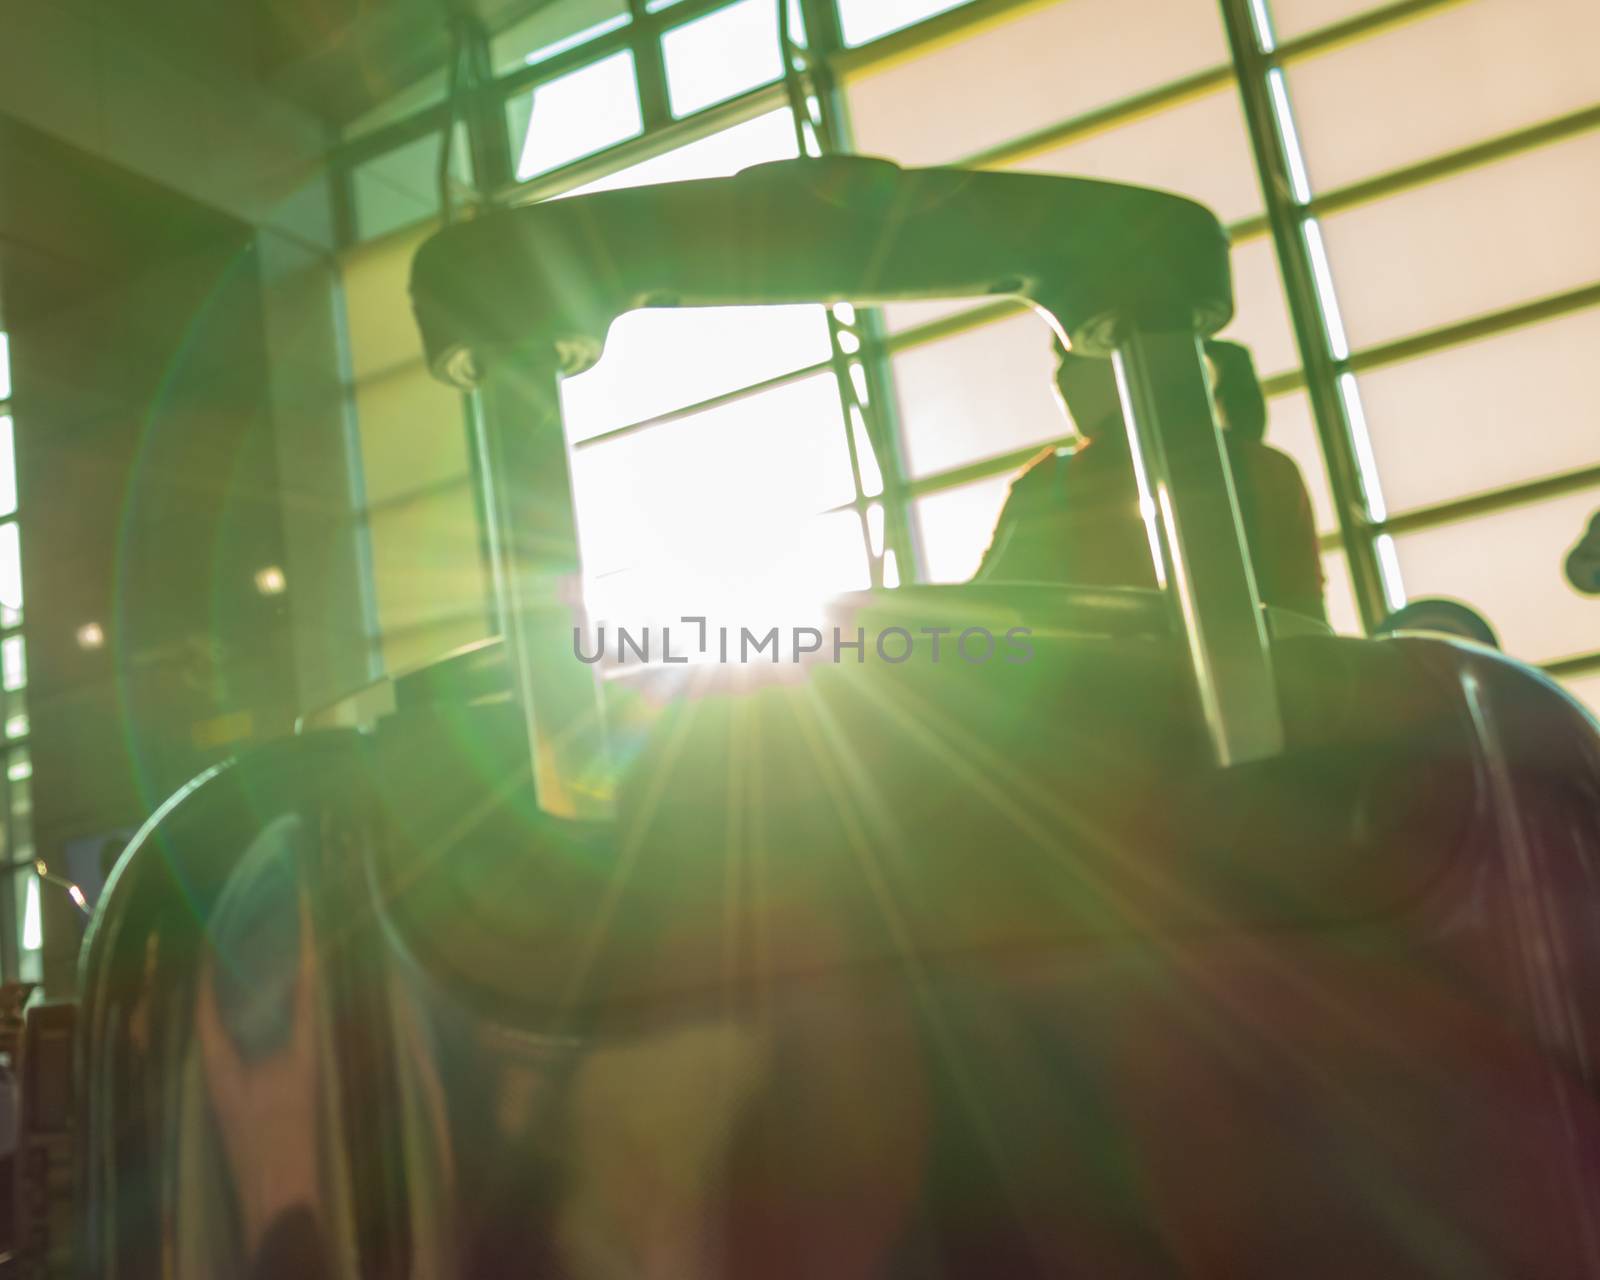 Lens flare through luggage handle, travel concept